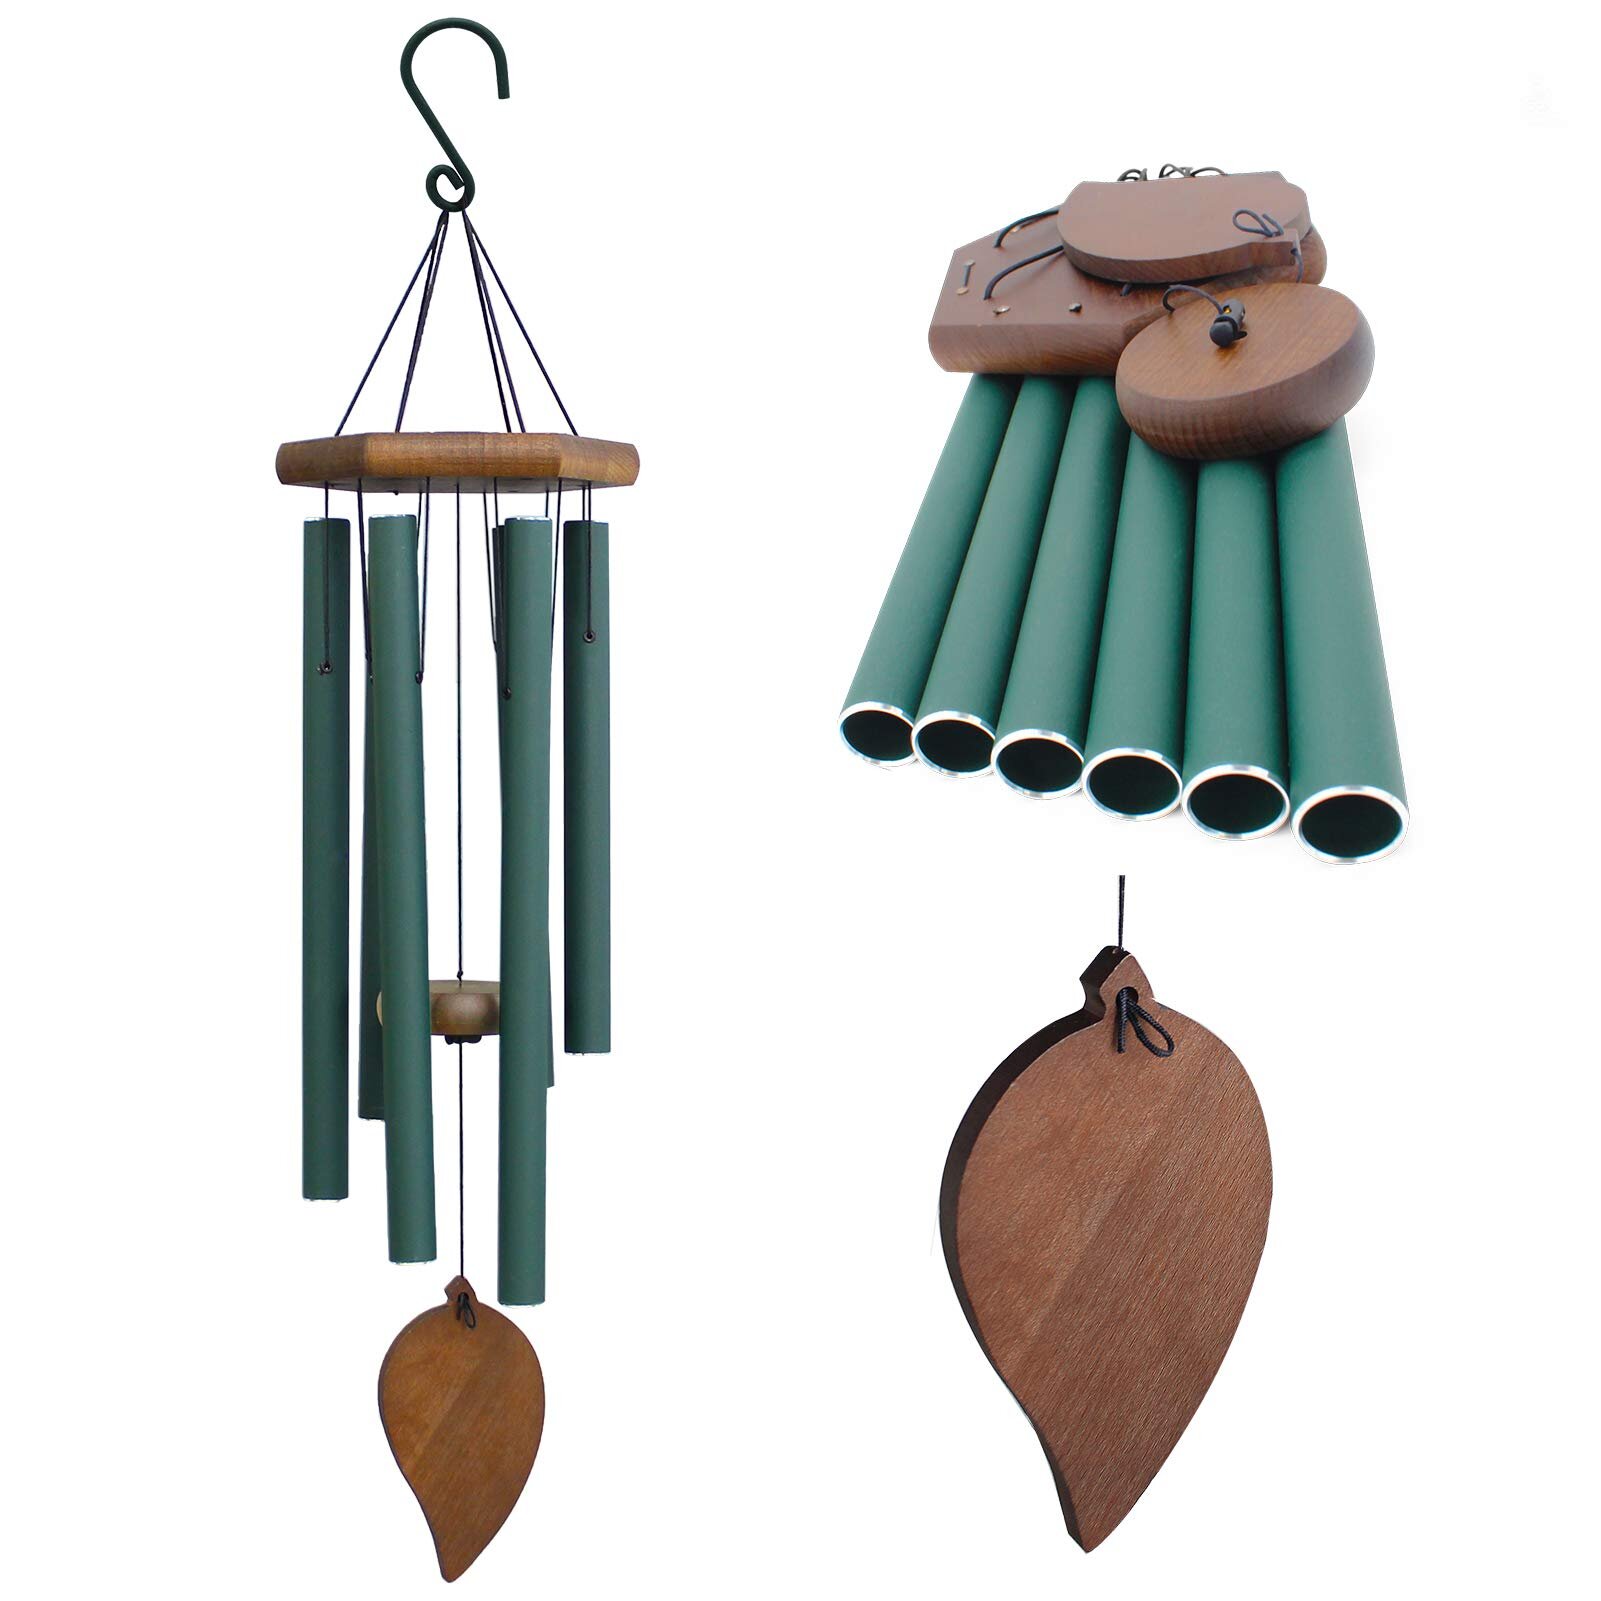 6 Metal Tubes Wind Chimes Windchime Gift Home Yard Outdoor Garden Decor US